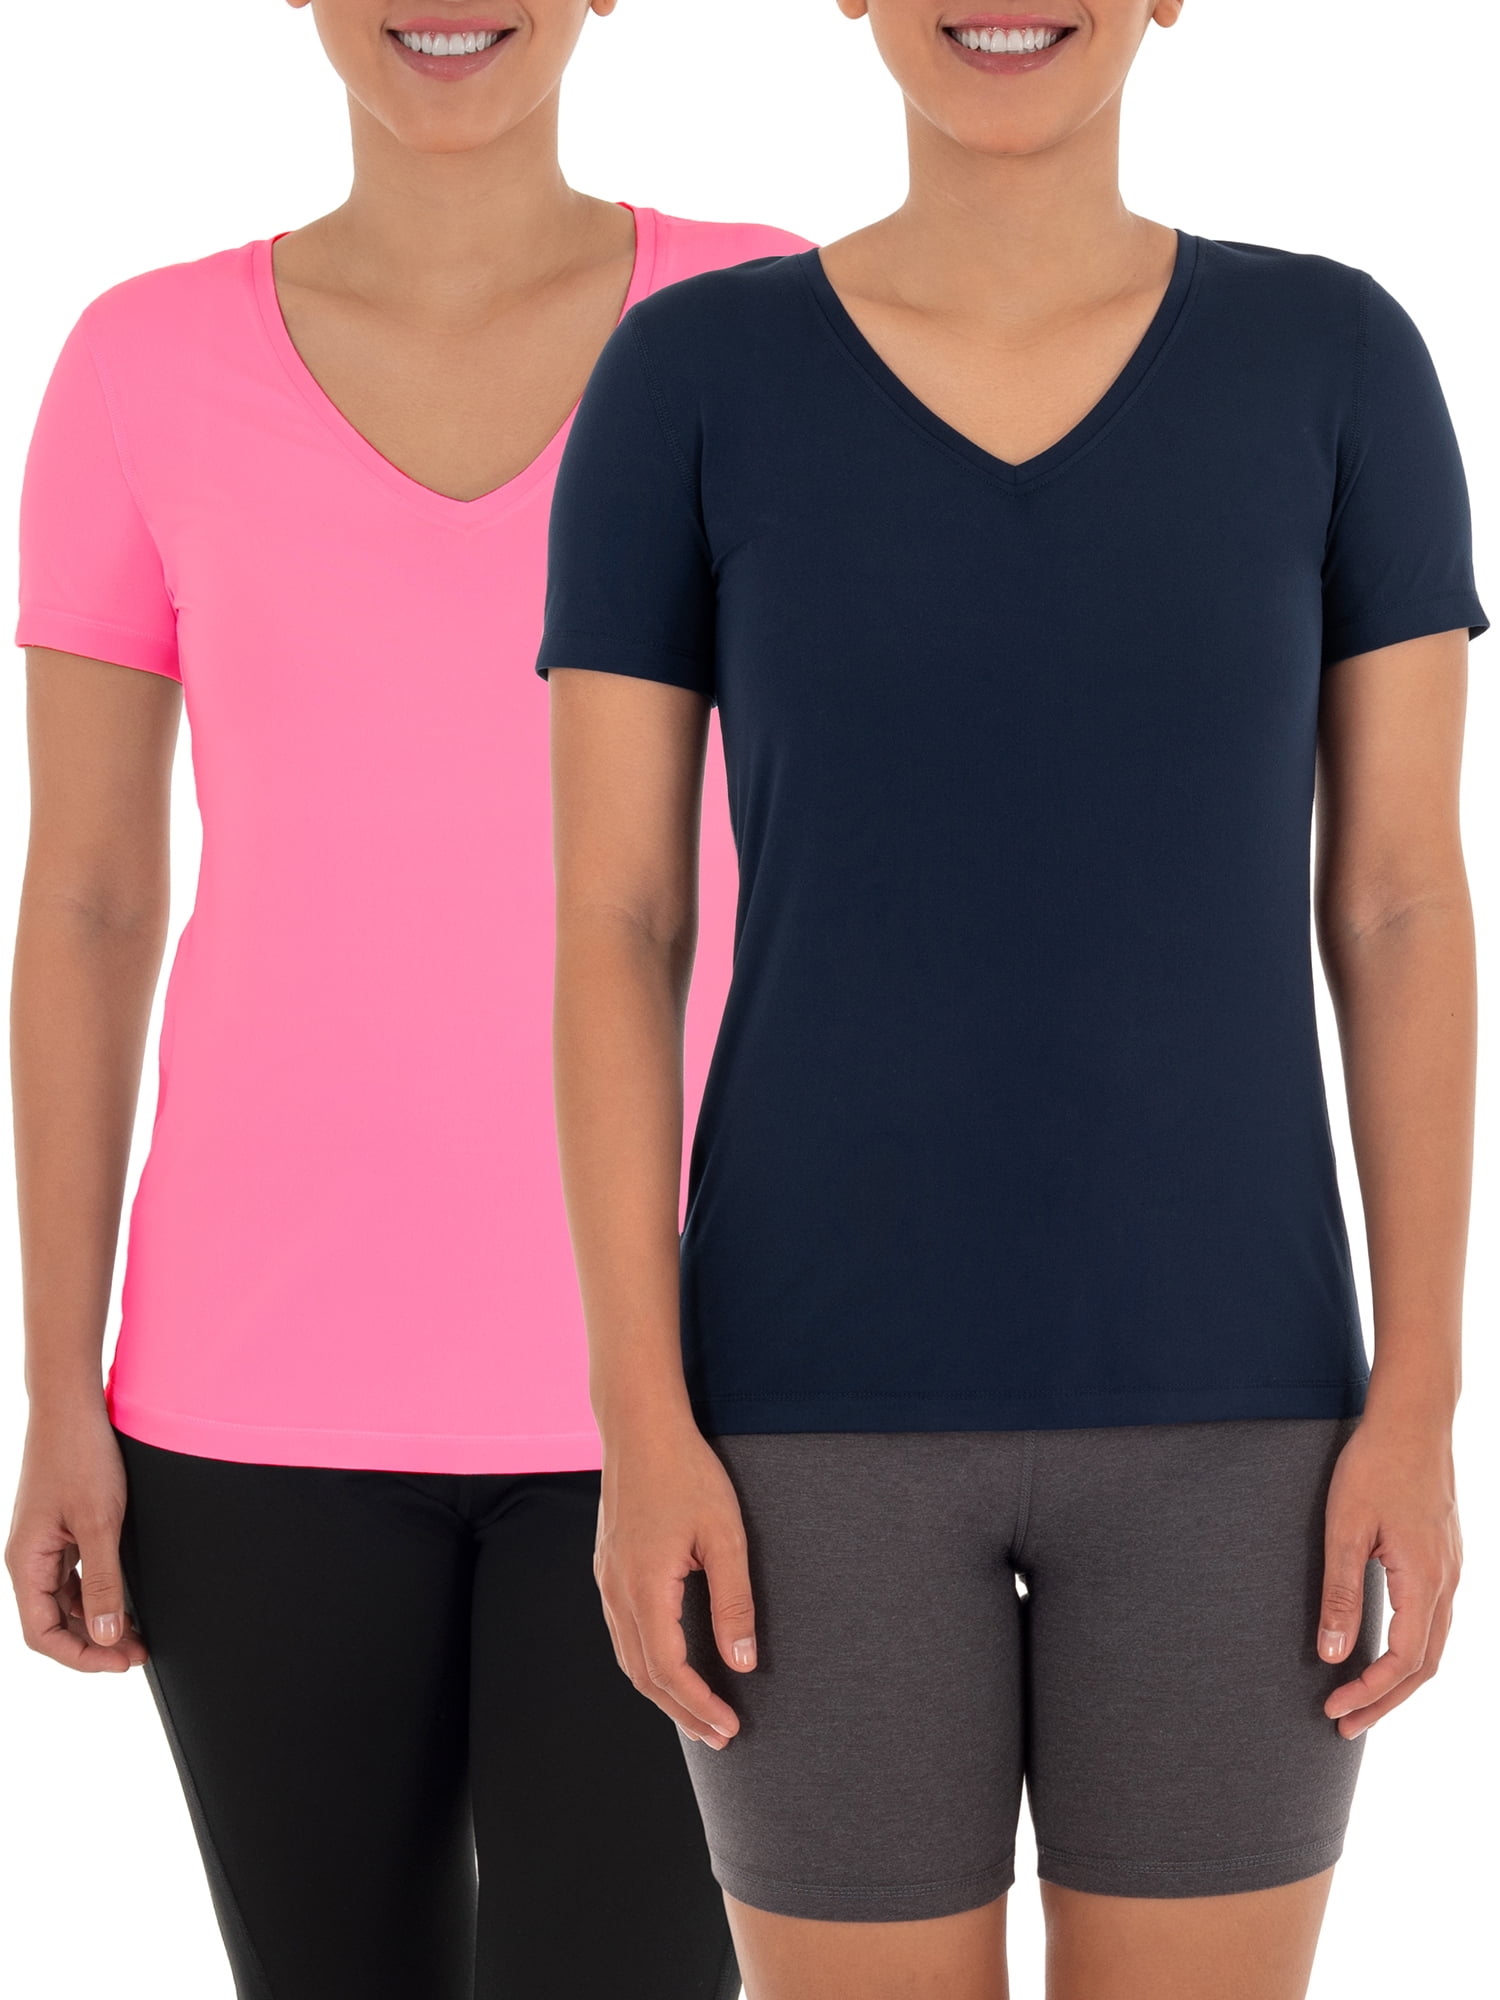 Navy/Graphite/White Ladies Adult Small 3-Color Wicking/Spandex V-Neck Jersey Athletic Sports Shirt 